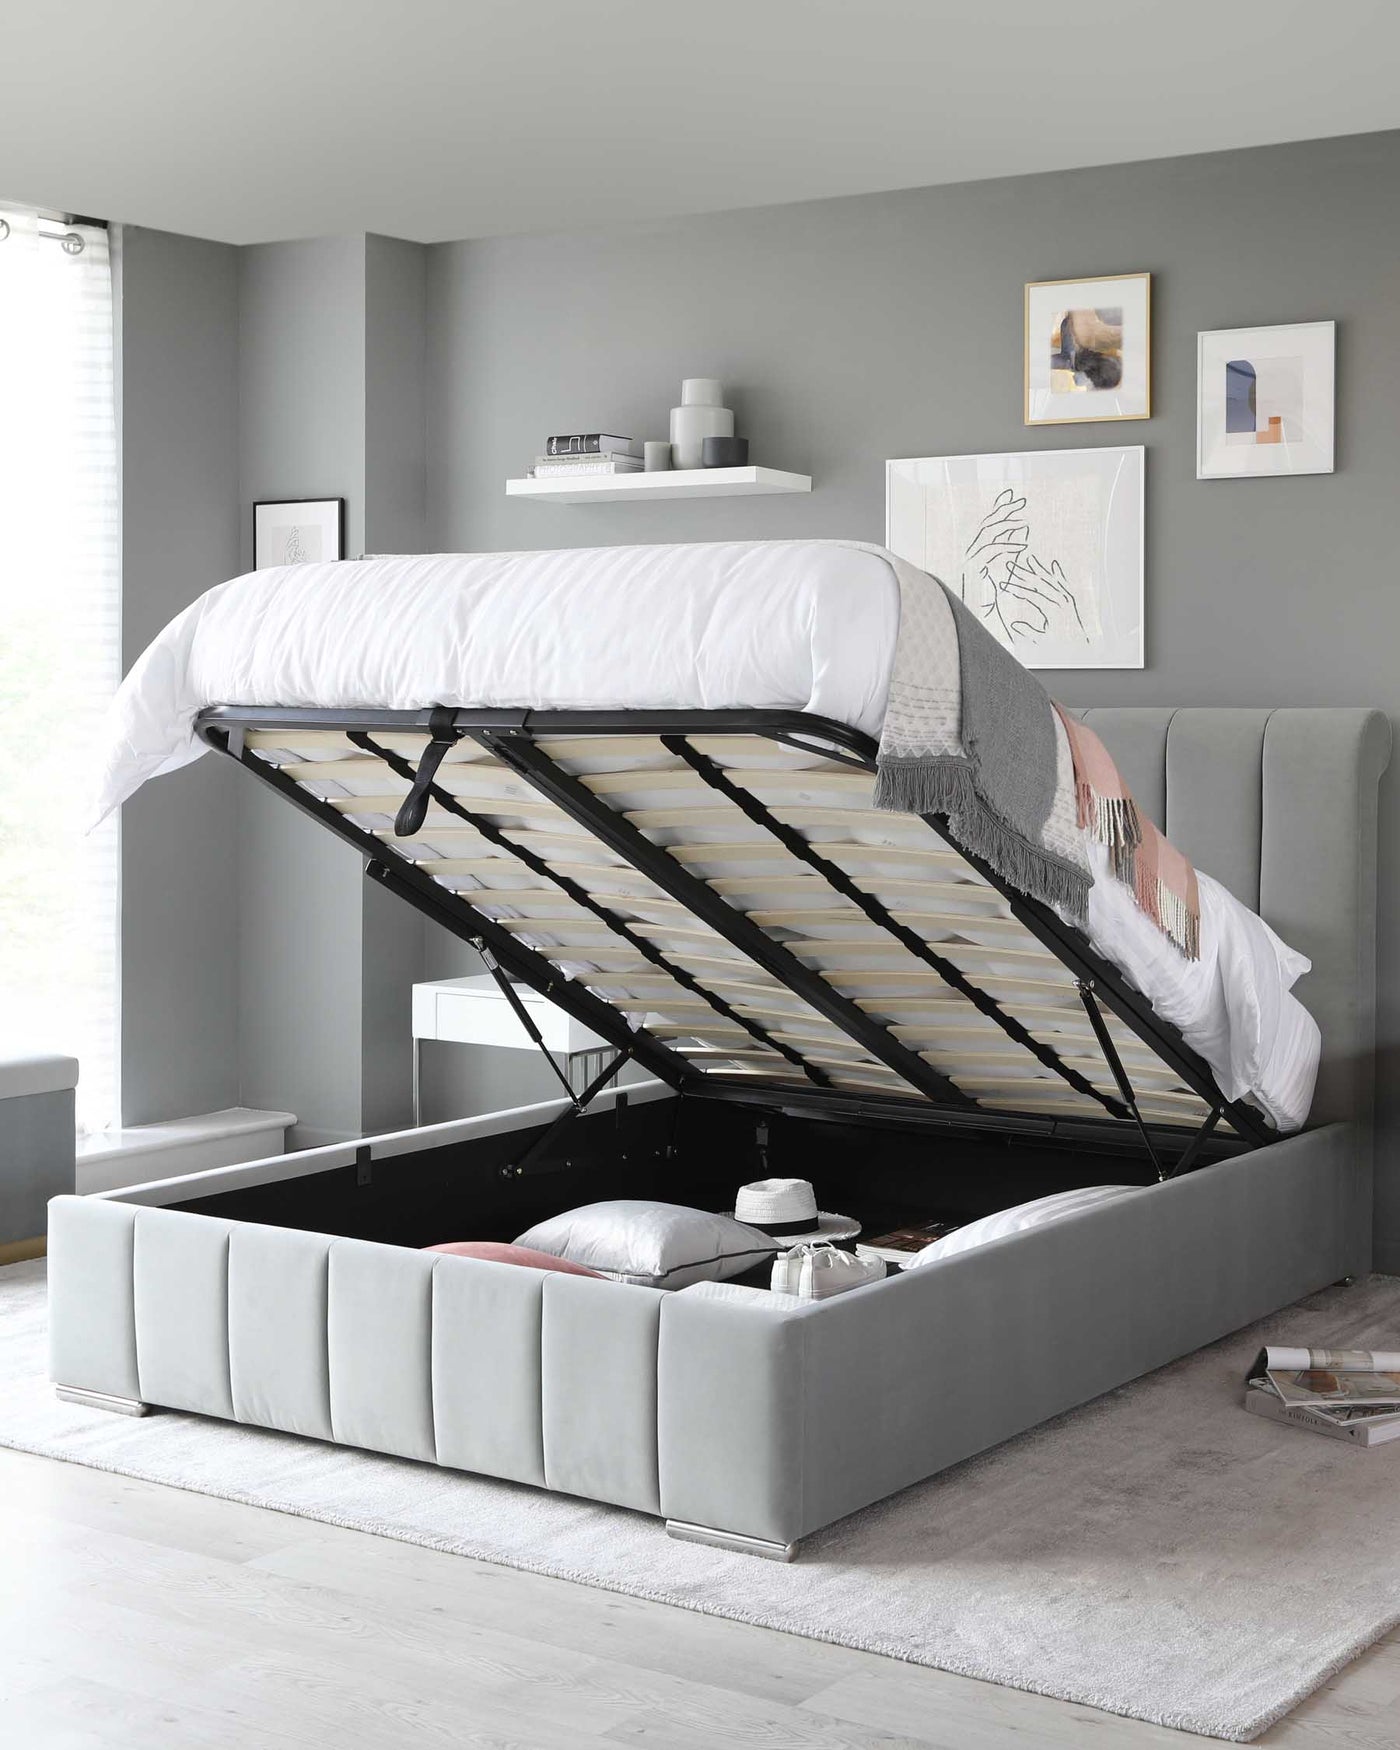 Gray upholstered storage bed with a lift-up frame revealing a spacious under-mattress storage compartment. The bed features a padded, channel-tufted headboard and is dressed with white and grey bedding. It rests on a light grey area rug, and the bed's modern design is complemented by minimalist wall art and a sleek white floating shelf above.